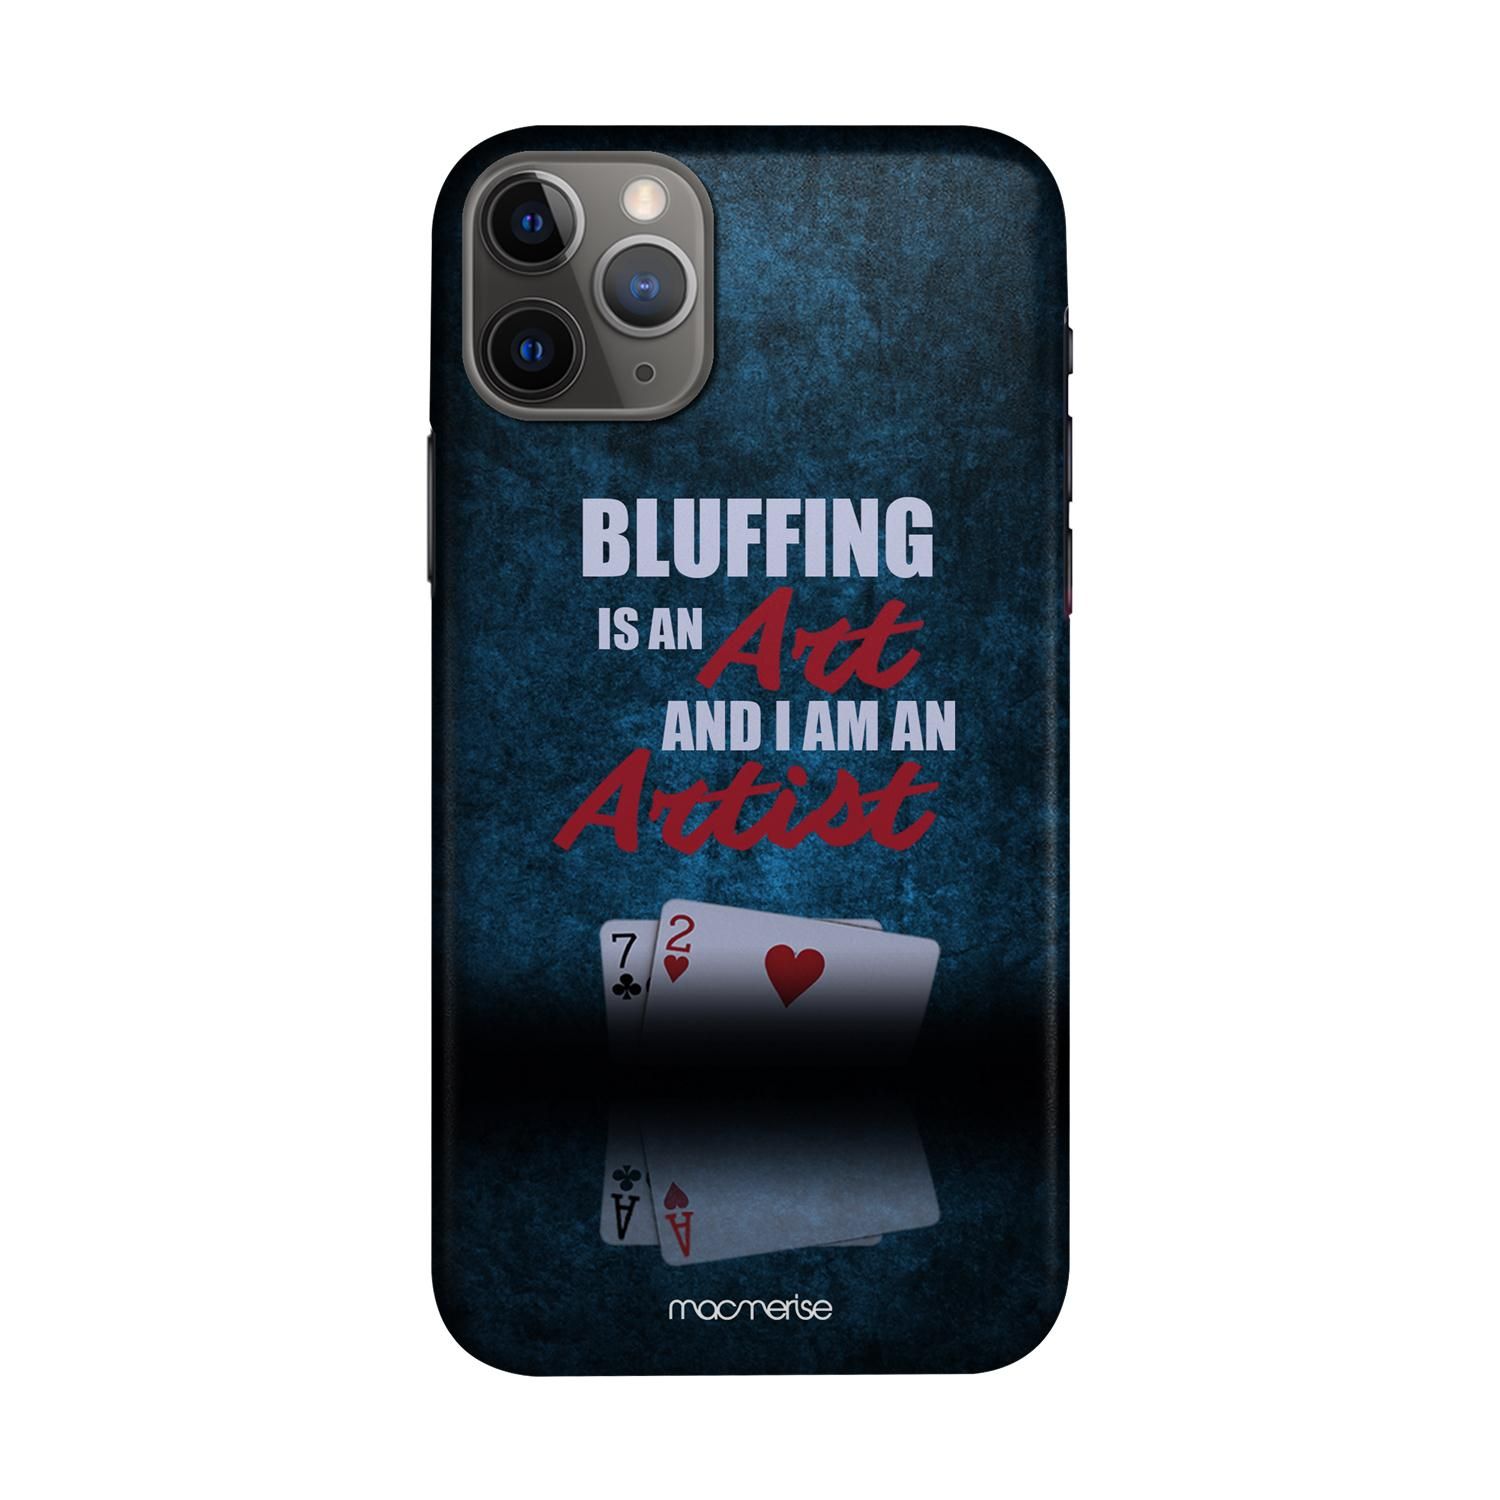 Buy Art of Bluffing - Sleek Phone Case for iPhone 11 Pro Max Online